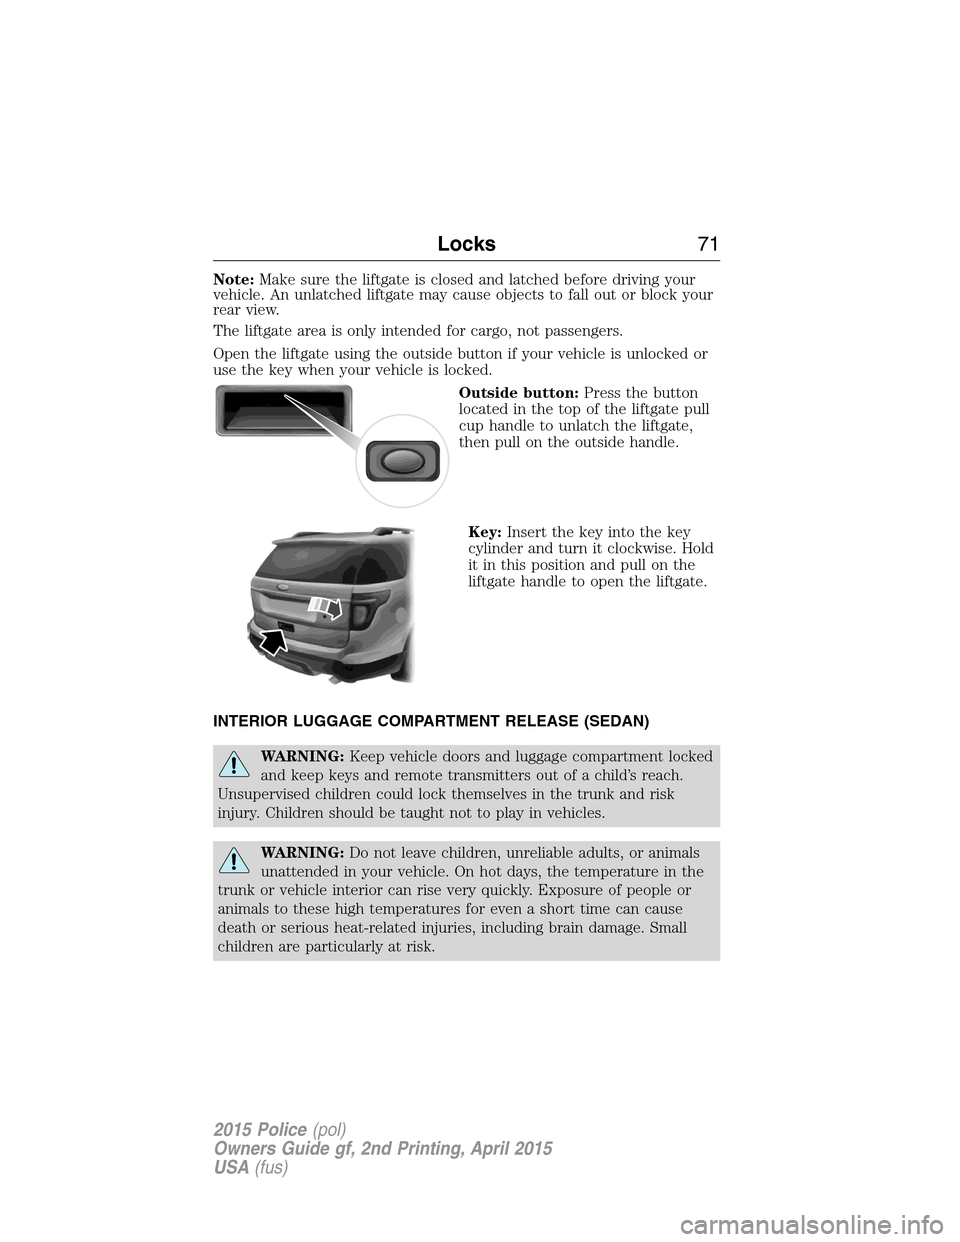 FORD POLICE INTERCEPTOR SEDAN 2015 1.G Owners Guide Note:Make sure the liftgate is closed and latched before driving your
vehicle. An unlatched liftgate may cause objects to fall out or block your
rear view.
The liftgate area is only intended for cargo